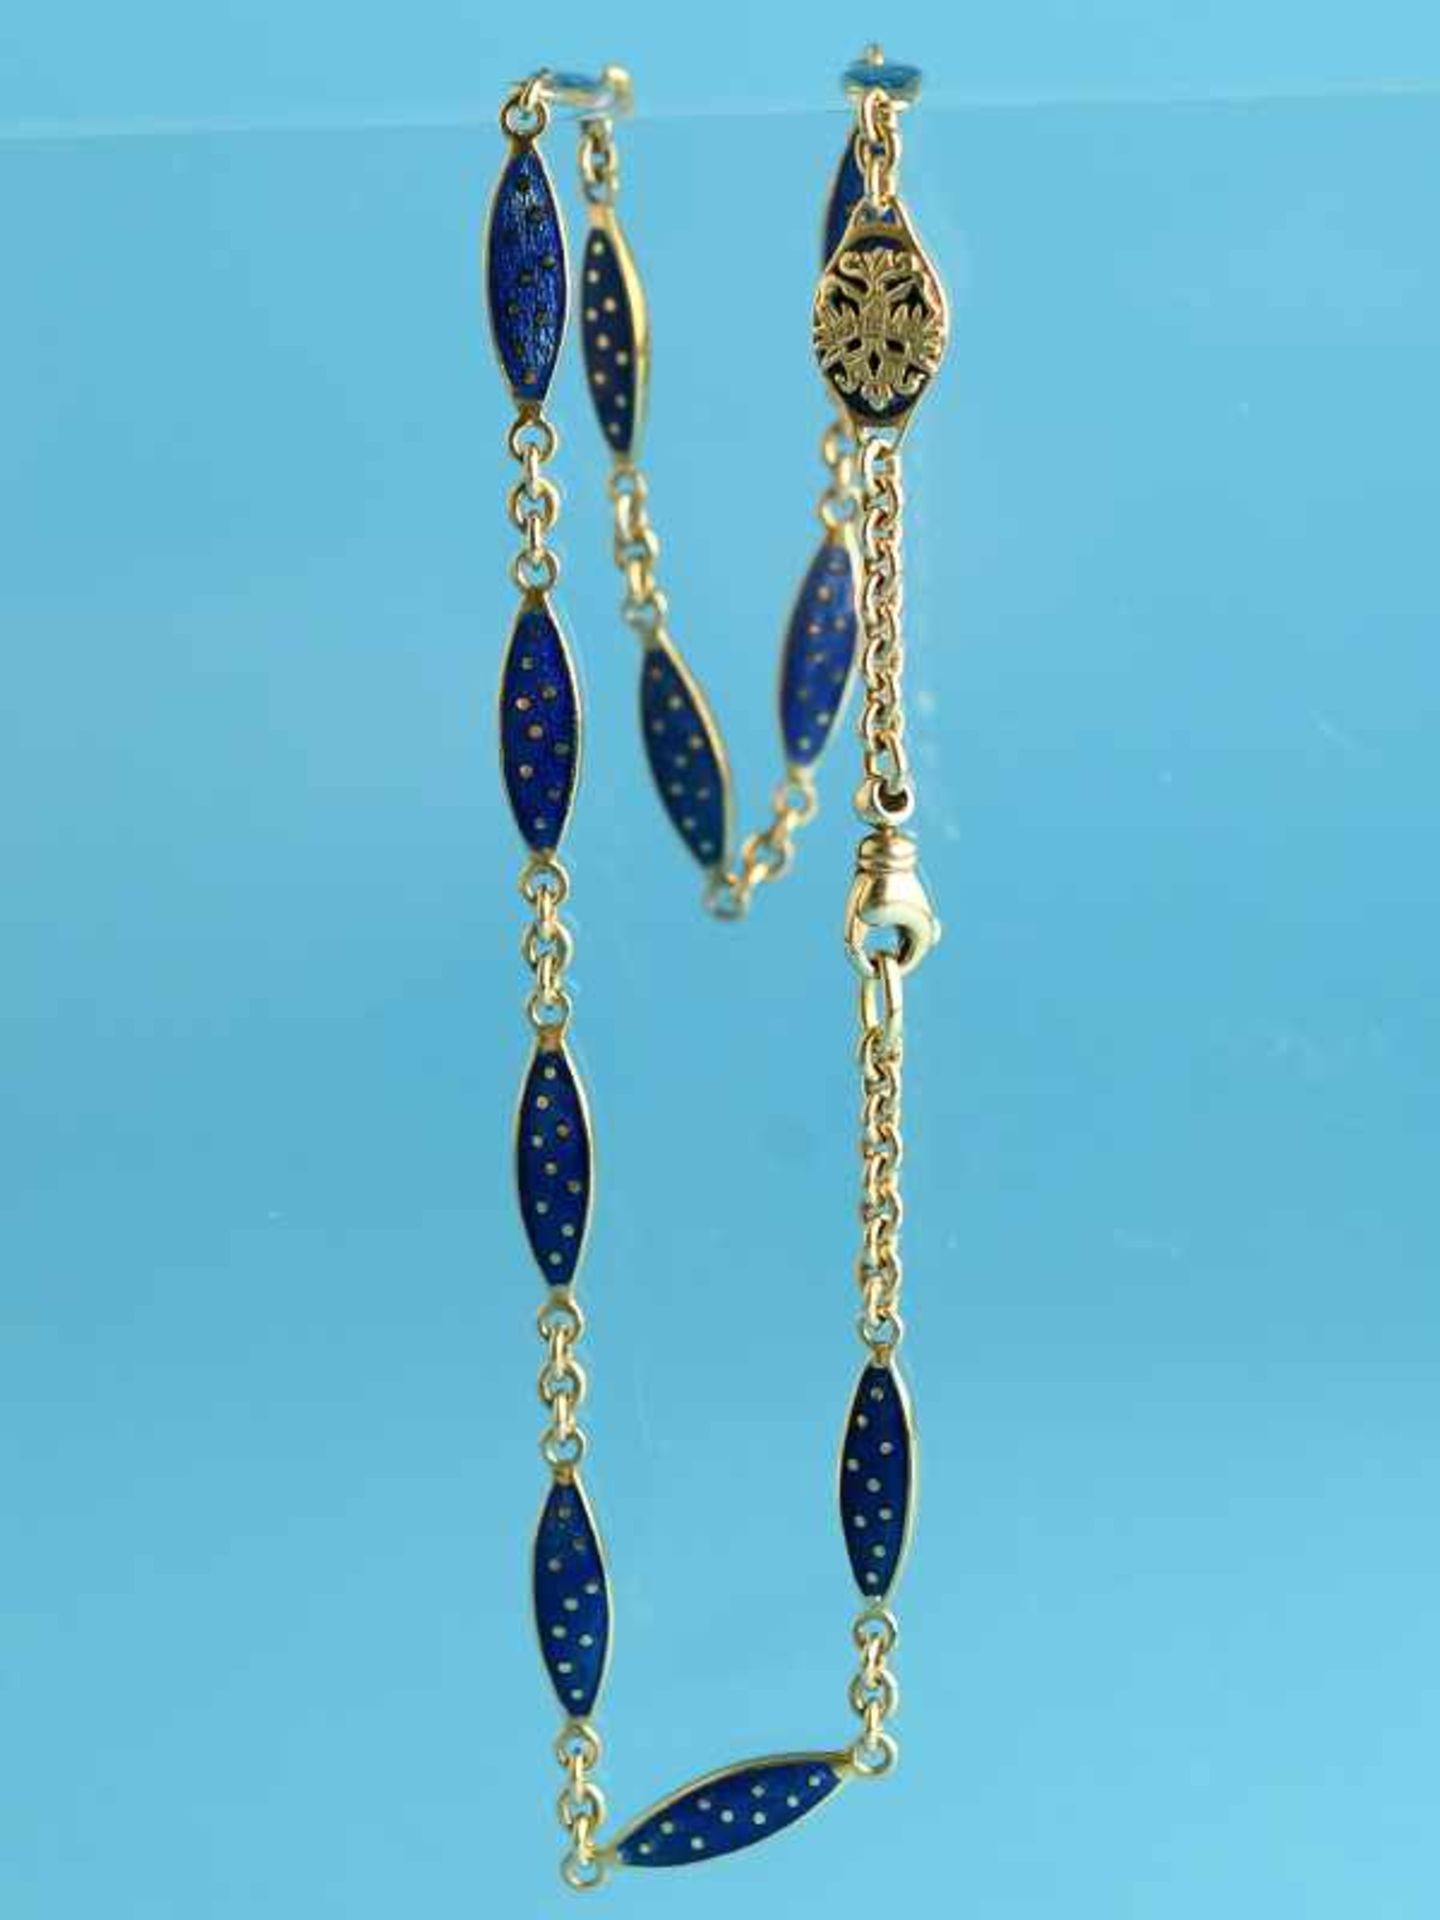 Collier mit Emaille, Collection Fabergé by Victor Mayer, No. 37/ 300, Pforzheim, 20. Jh. 750/- - Image 8 of 8